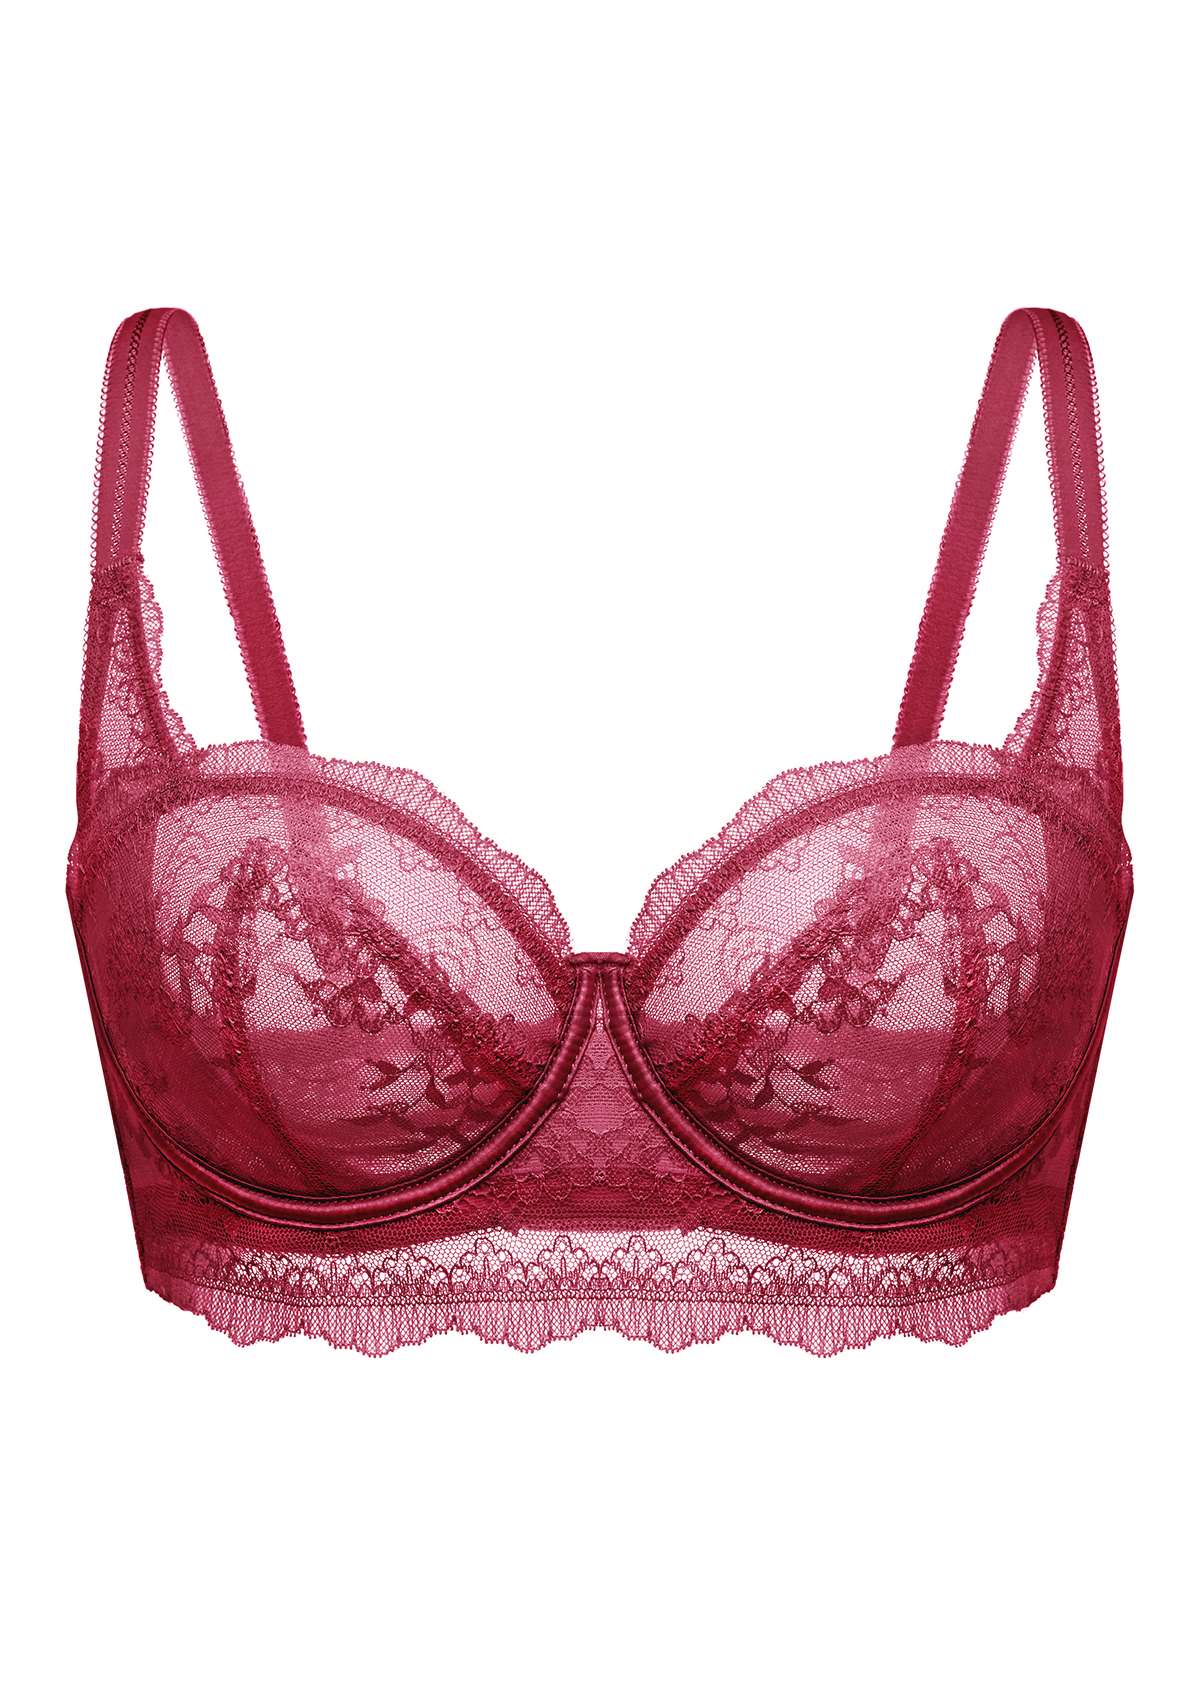 HSIA Floral Lace Unlined Bridal Balconette Bra Set - Supportive Classic - Burgundy / 34 / D